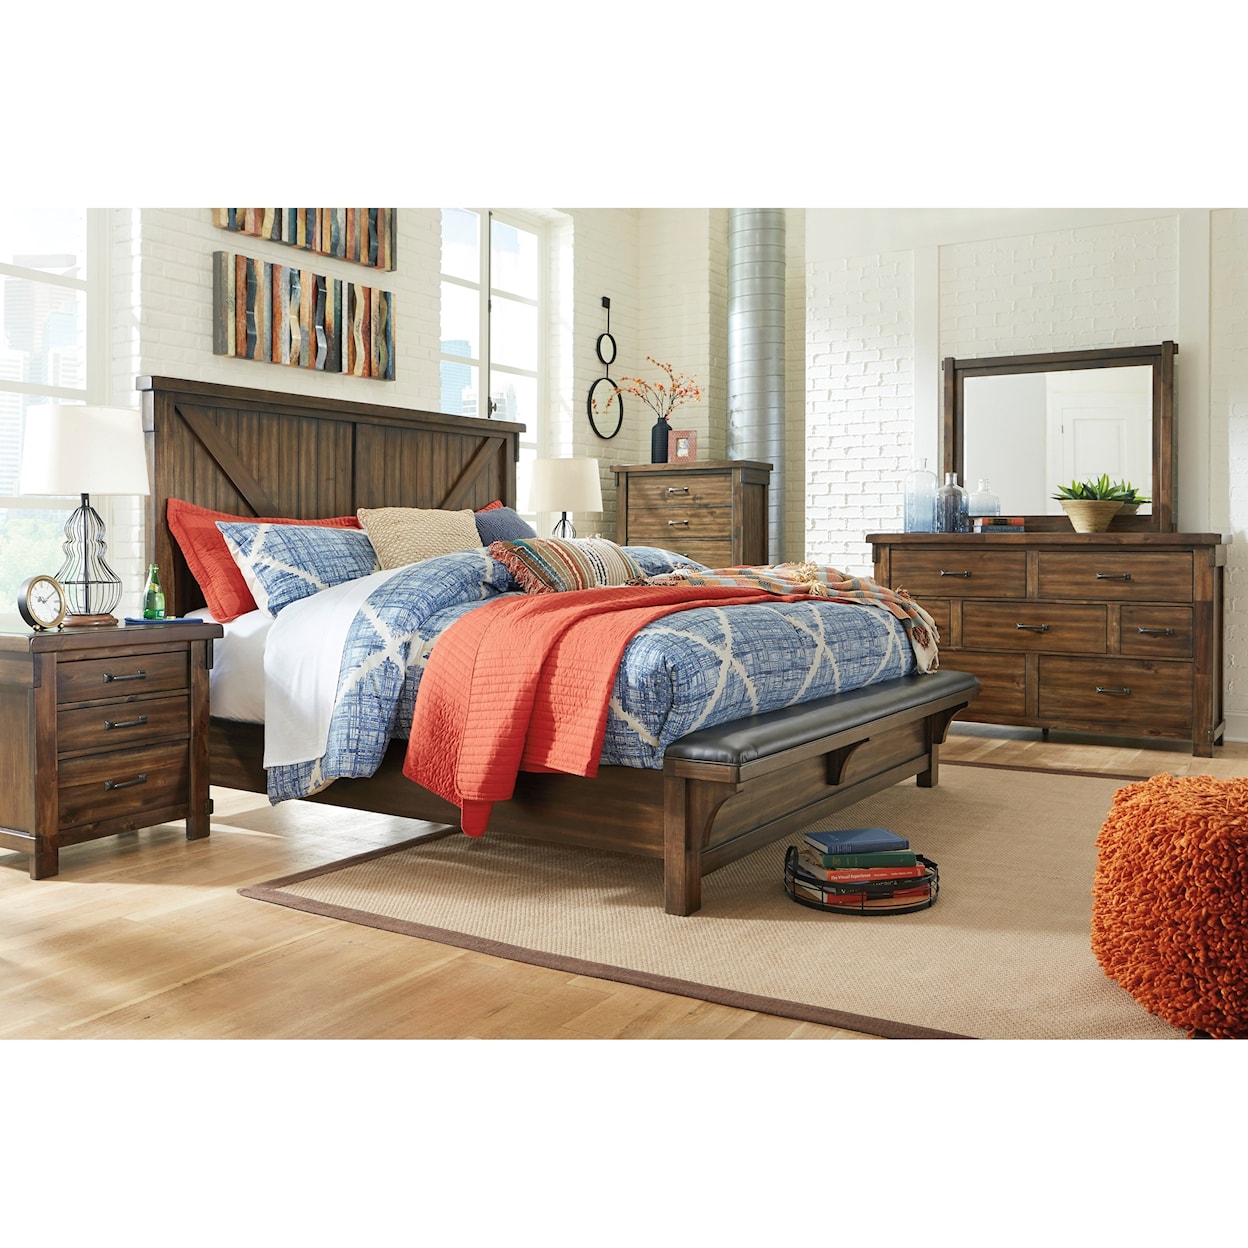 Signature Design by Ashley Lakeleigh 6PC Queen Bedroom Group